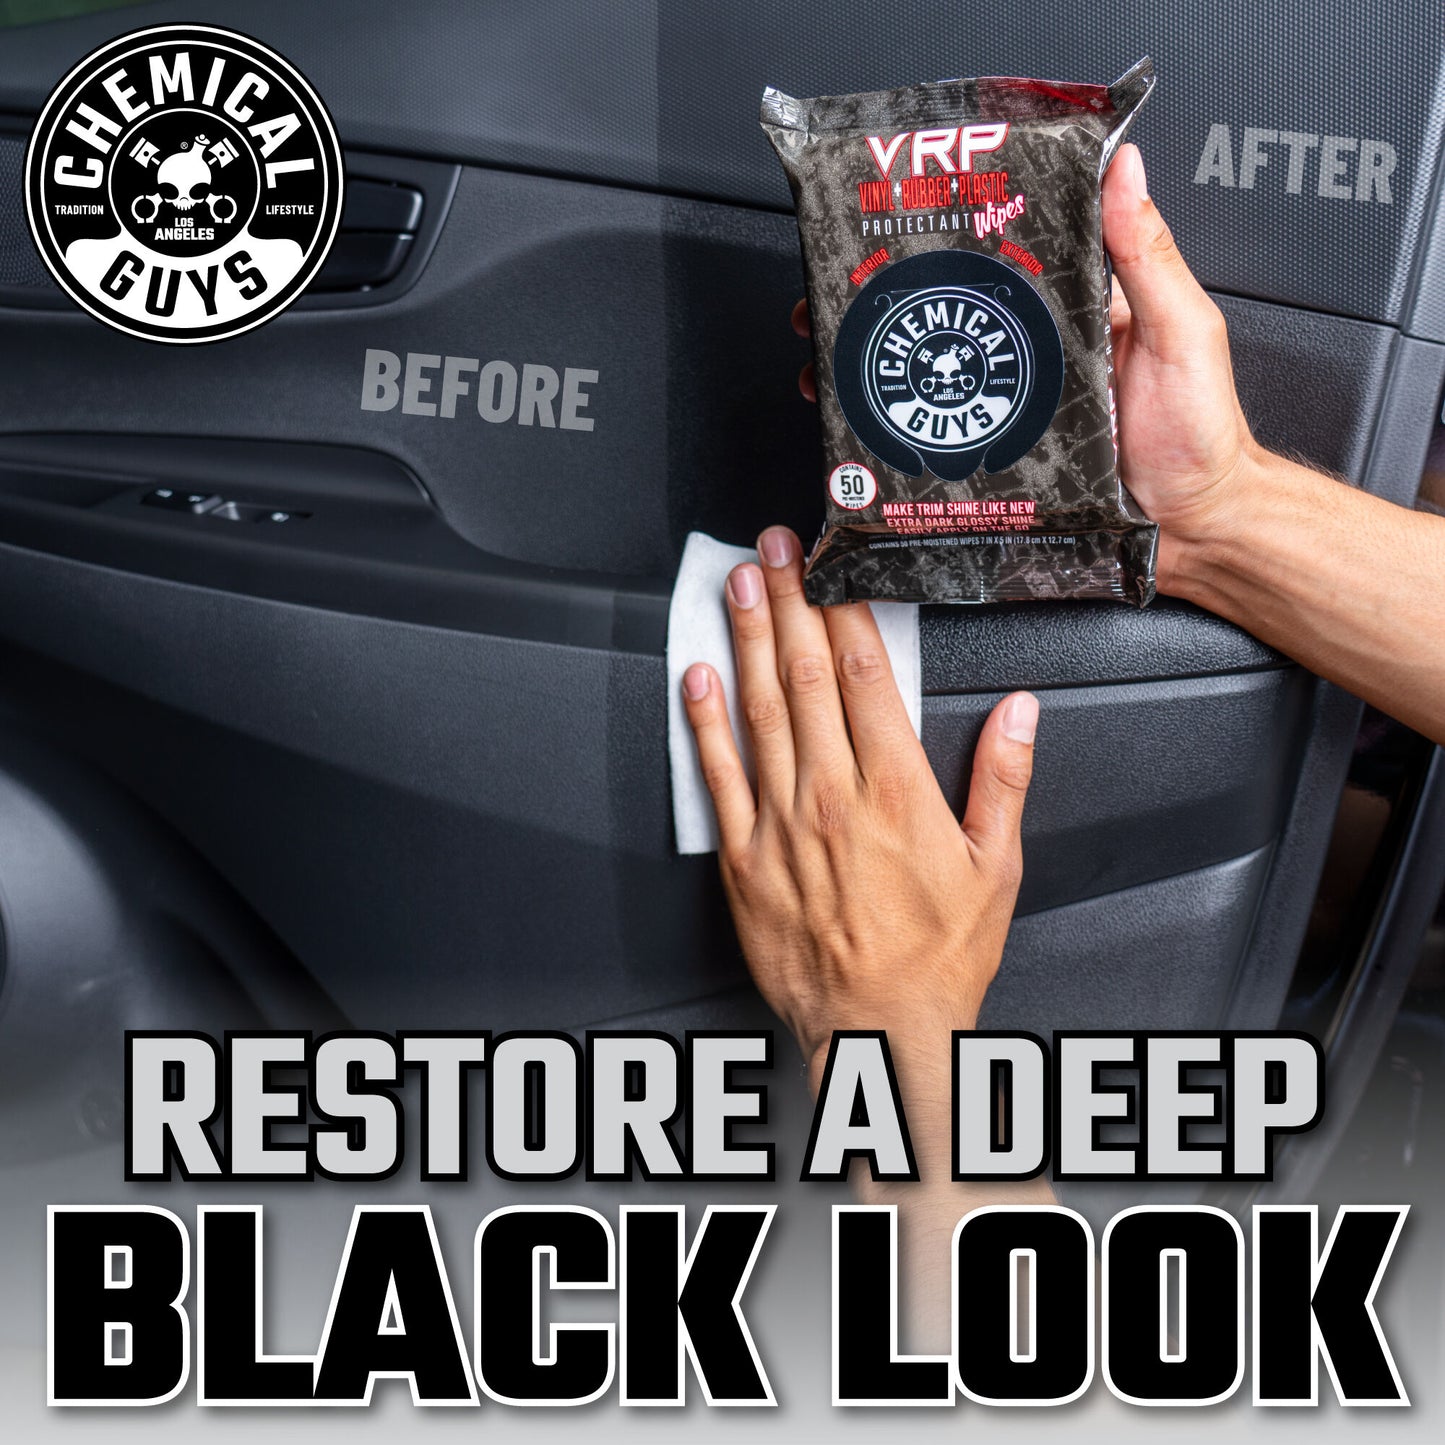 VRP Protectant Wipes